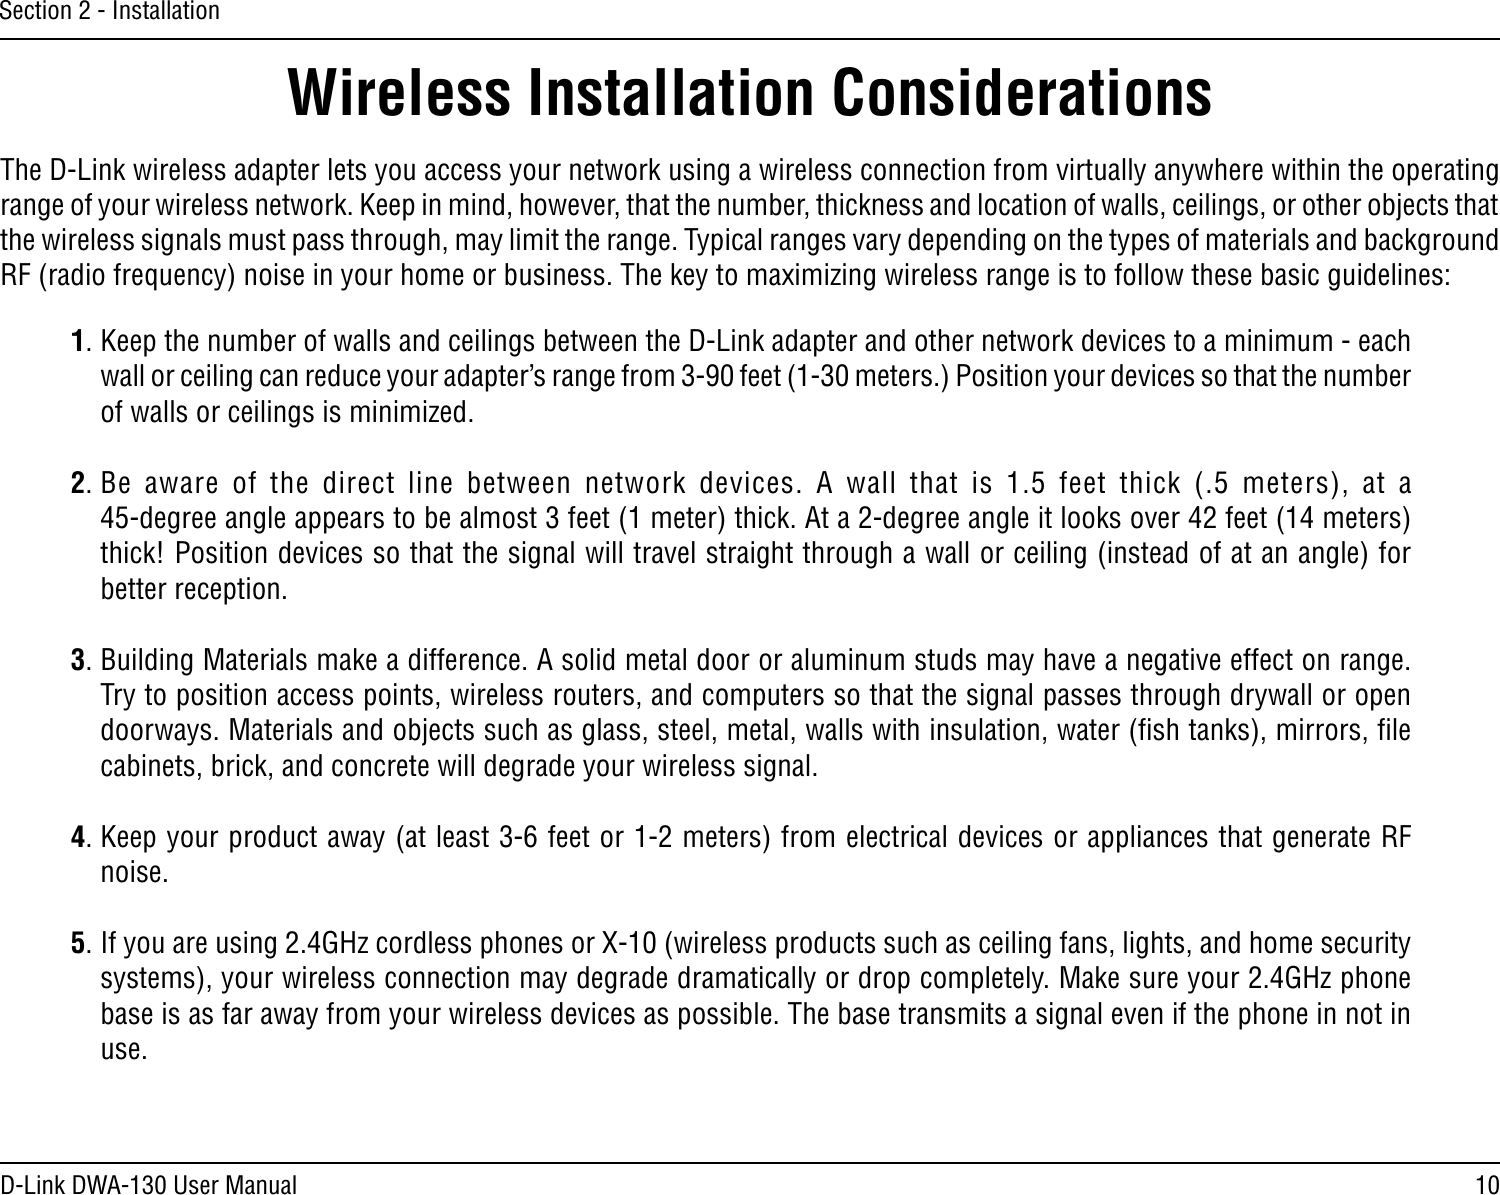 10D-Link DWA-130 User ManualSection 2 - InstallationWireless Installation ConsiderationsThe D-Link wireless adapter lets you access your network using a wireless connection from virtually anywhere within the operating range of your wireless network. Keep in mind, however, that the number, thickness and location of walls, ceilings, or other objects that the wireless signals must pass through, may limit the range. Typical ranges vary depending on the types of materials and background RF (radio frequency) noise in your home or business. The key to maximizing wireless range is to follow these basic guidelines:1. Keep the number of walls and ceilings between the D-Link adapter and other network devices to a minimum - each wall or ceiling can reduce your adapter’s range from 3-90 feet (1-30 meters.) Position your devices so that the number of walls or ceilings is minimized.2. Be  aware  of  the  direct  line  between  network  devices.  A  wall  that  is  1.5  feet  thick  (.5  meters),  at  a  45-degree angle appears to be almost 3 feet (1 meter) thick. At a 2-degree angle it looks over 42 feet (14 meters) thick! Position devices so that the signal will travel straight through a wall or ceiling (instead of at an angle) for better reception.3. Building Materials make a difference. A solid metal door or aluminum studs may have a negative effect on range. Try to position access points, wireless routers, and computers so that the signal passes through drywall or open doorways. Materials and objects such as glass, steel, metal, walls with insulation, water (ﬁsh tanks), mirrors, ﬁle cabinets, brick, and concrete will degrade your wireless signal.4. Keep your product away (at least 3-6 feet or 1-2 meters) from electrical devices or appliances that generate RF noise.5. If you are using 2.4GHz cordless phones or X-10 (wireless products such as ceiling fans, lights, and home security systems), your wireless connection may degrade dramatically or drop completely. Make sure your 2.4GHz phone base is as far away from your wireless devices as possible. The base transmits a signal even if the phone in not in use.